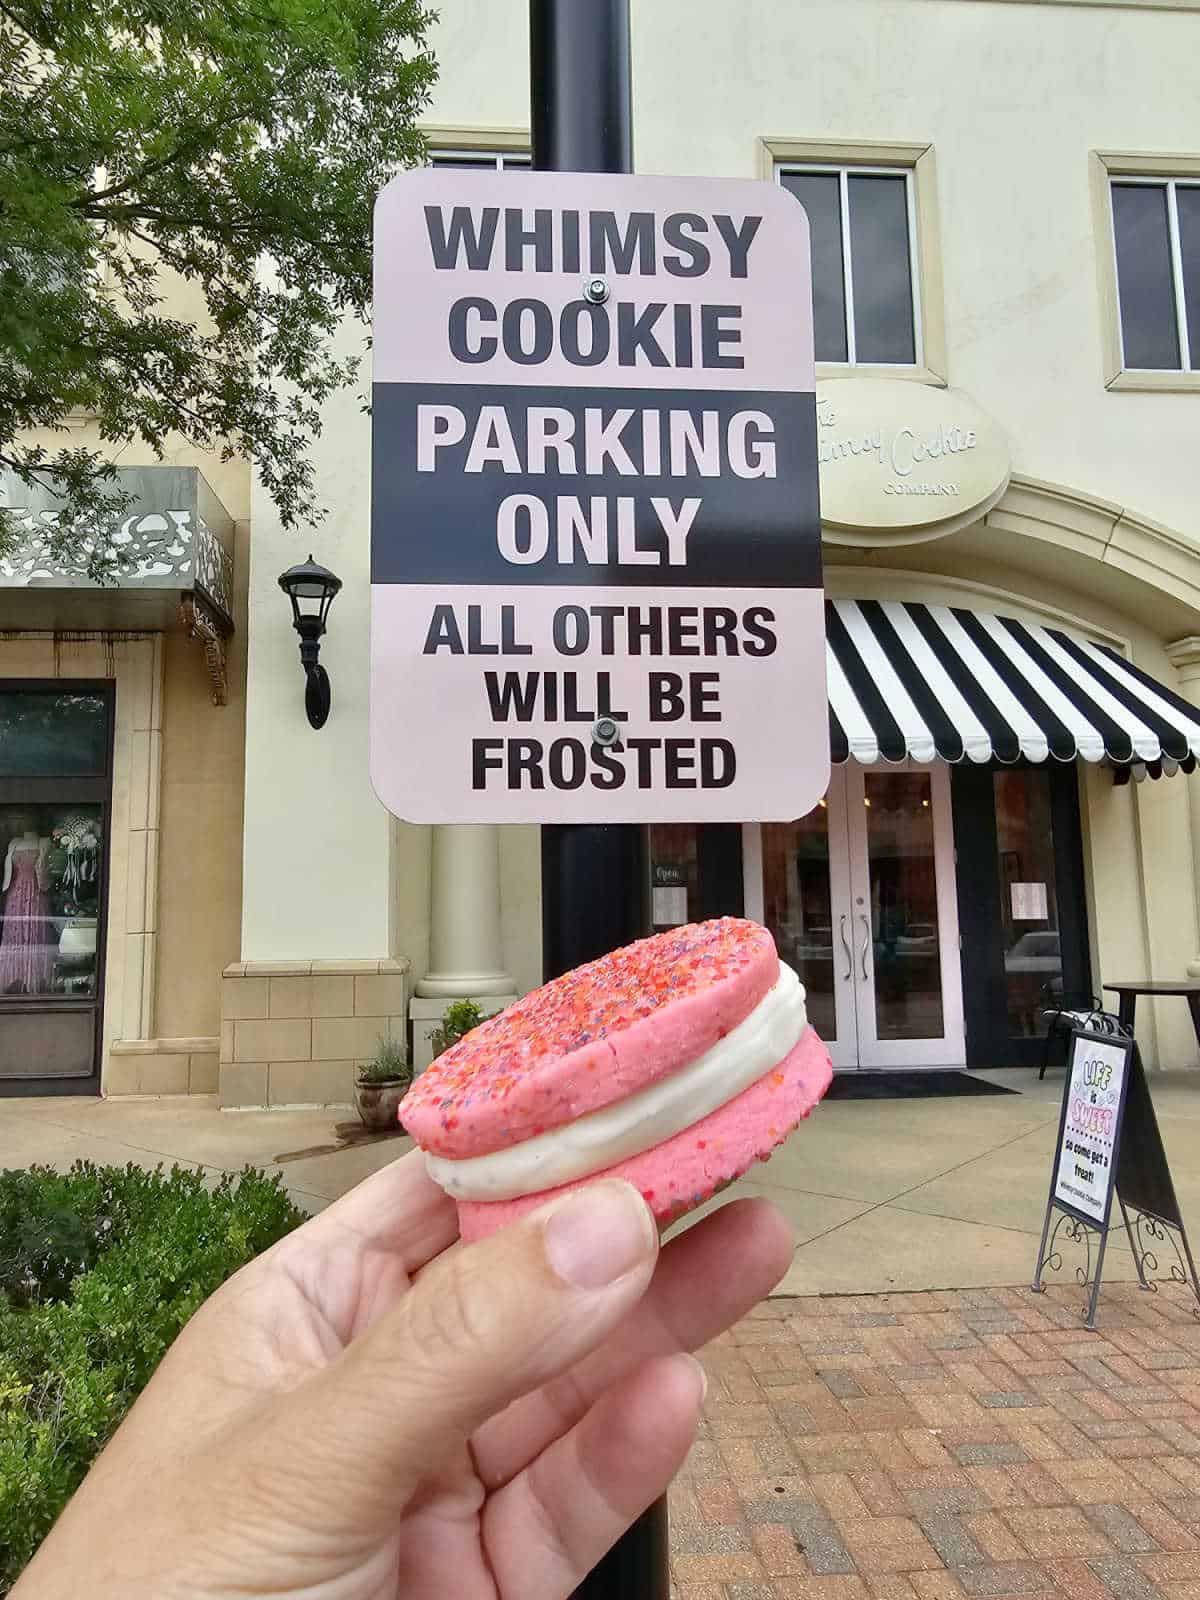 Whimsy Cookie Parking Only all others will be frosted sign above a hand holding a pink sandwich cookie